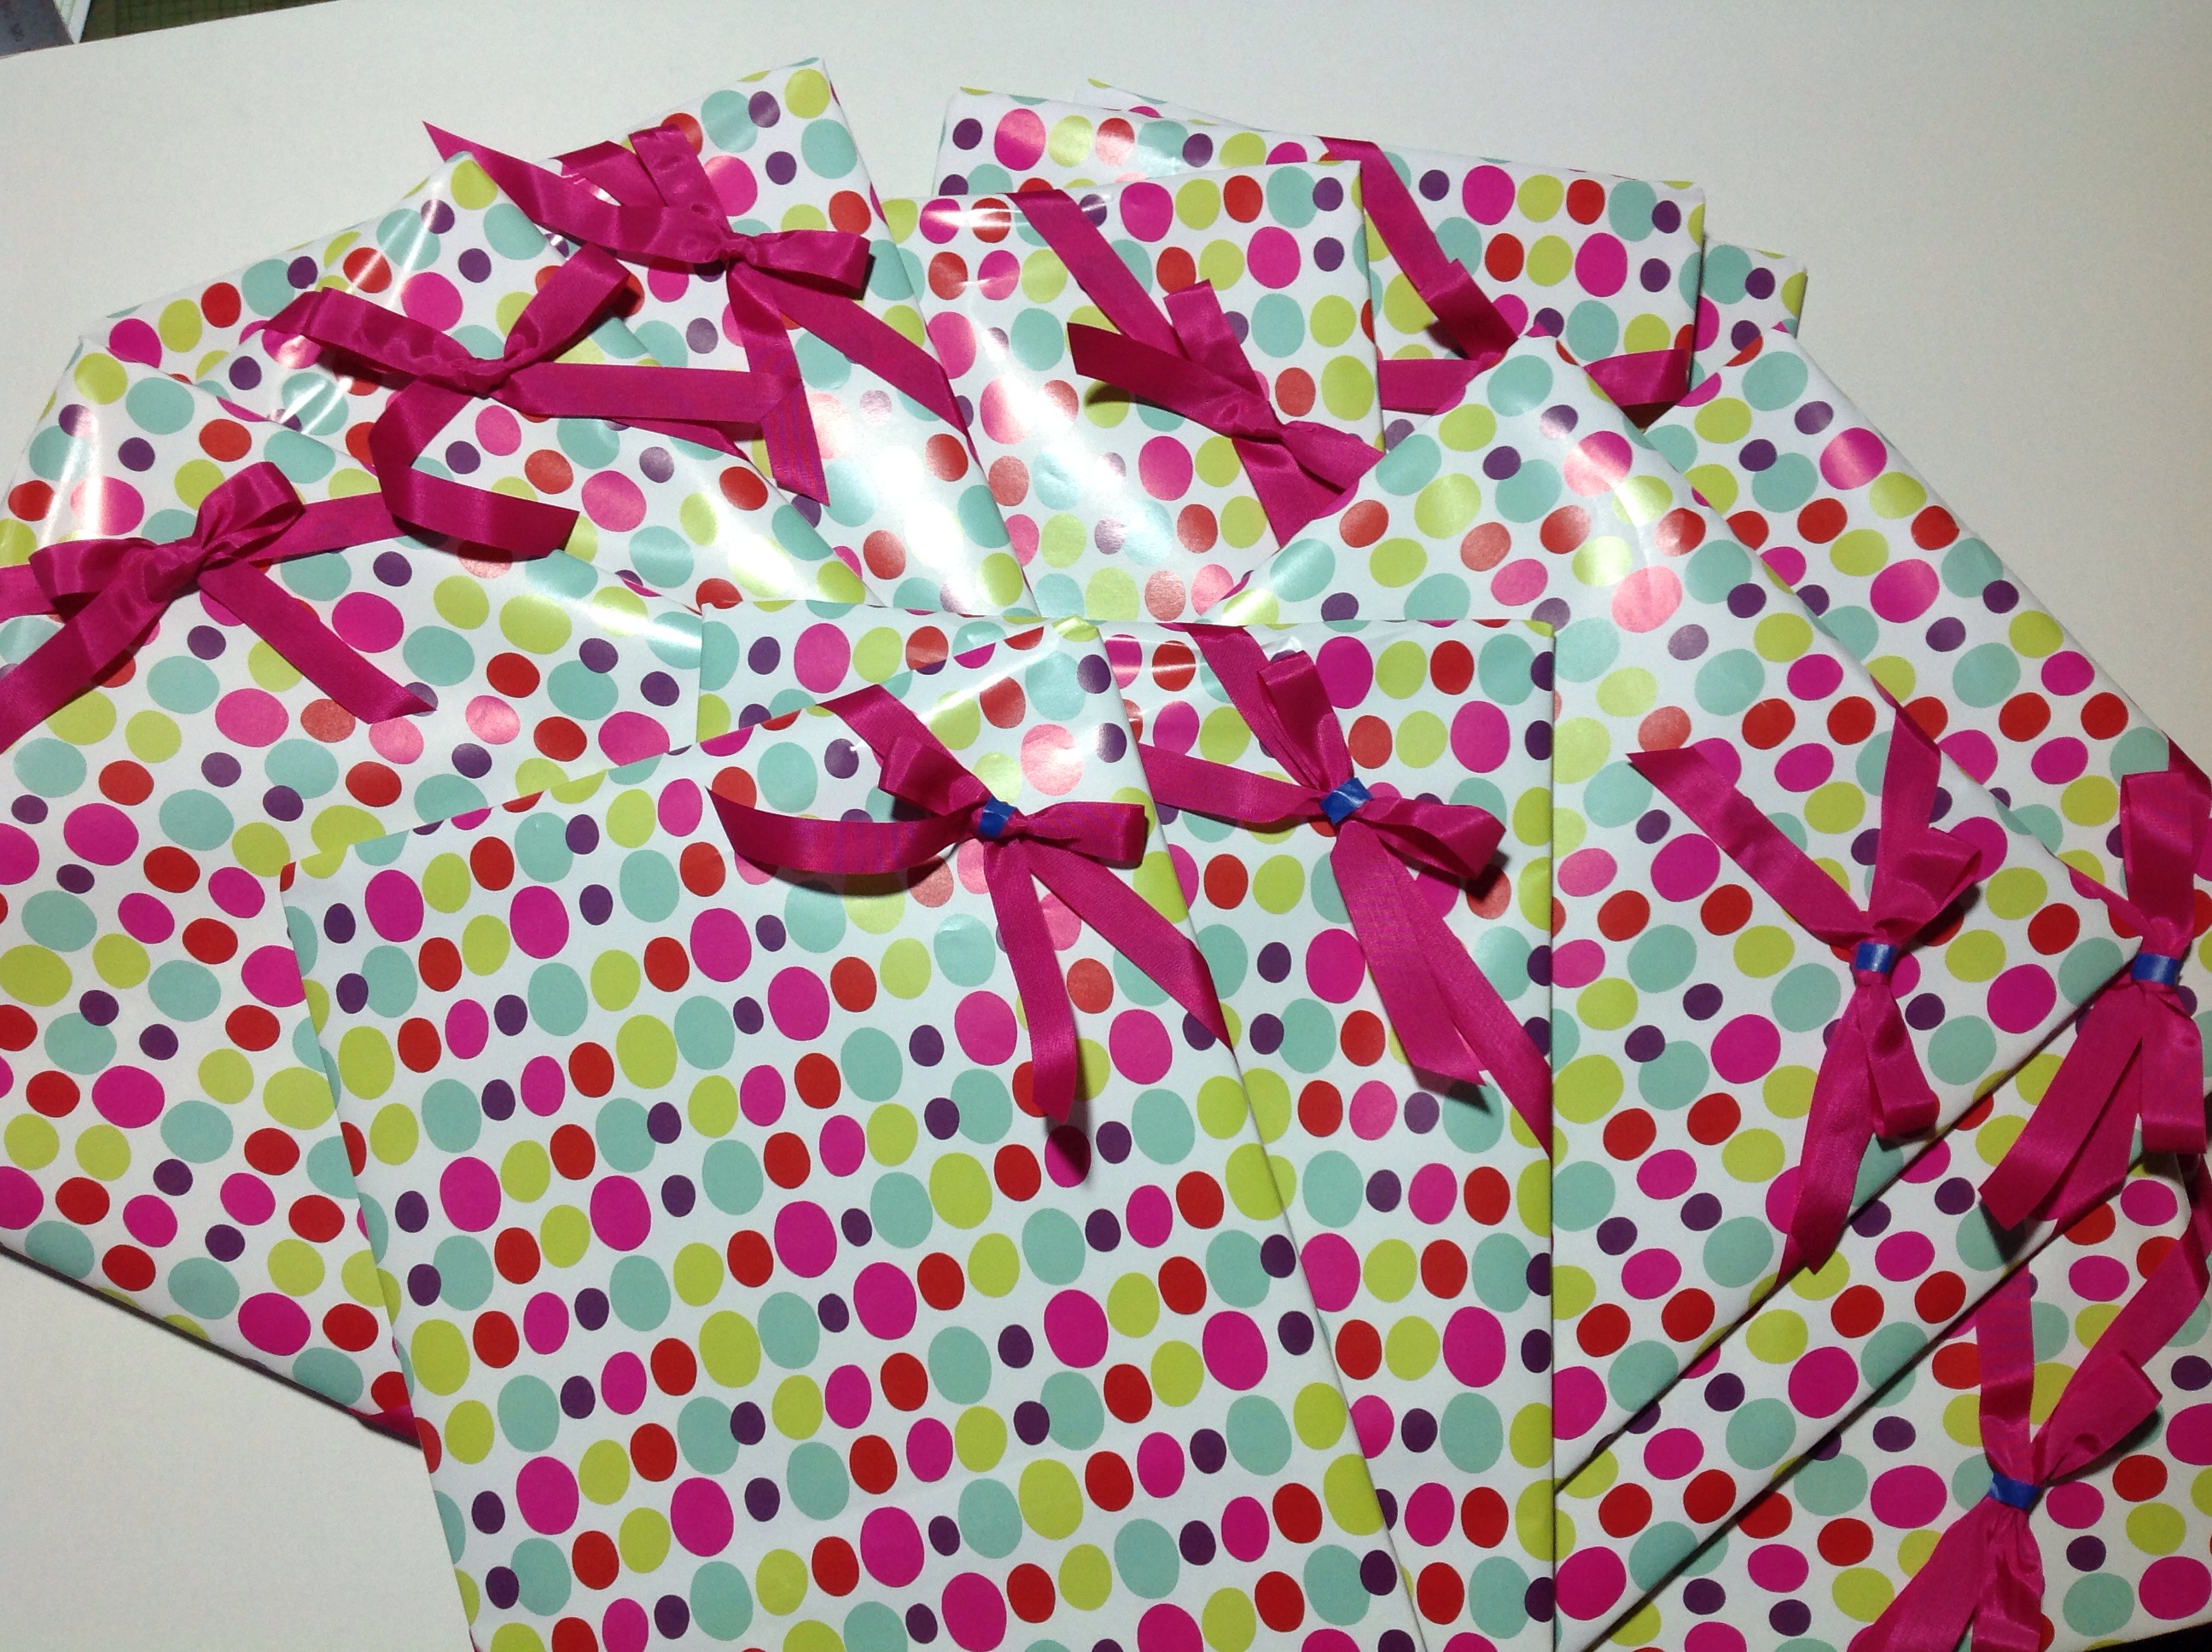 gift wrapping